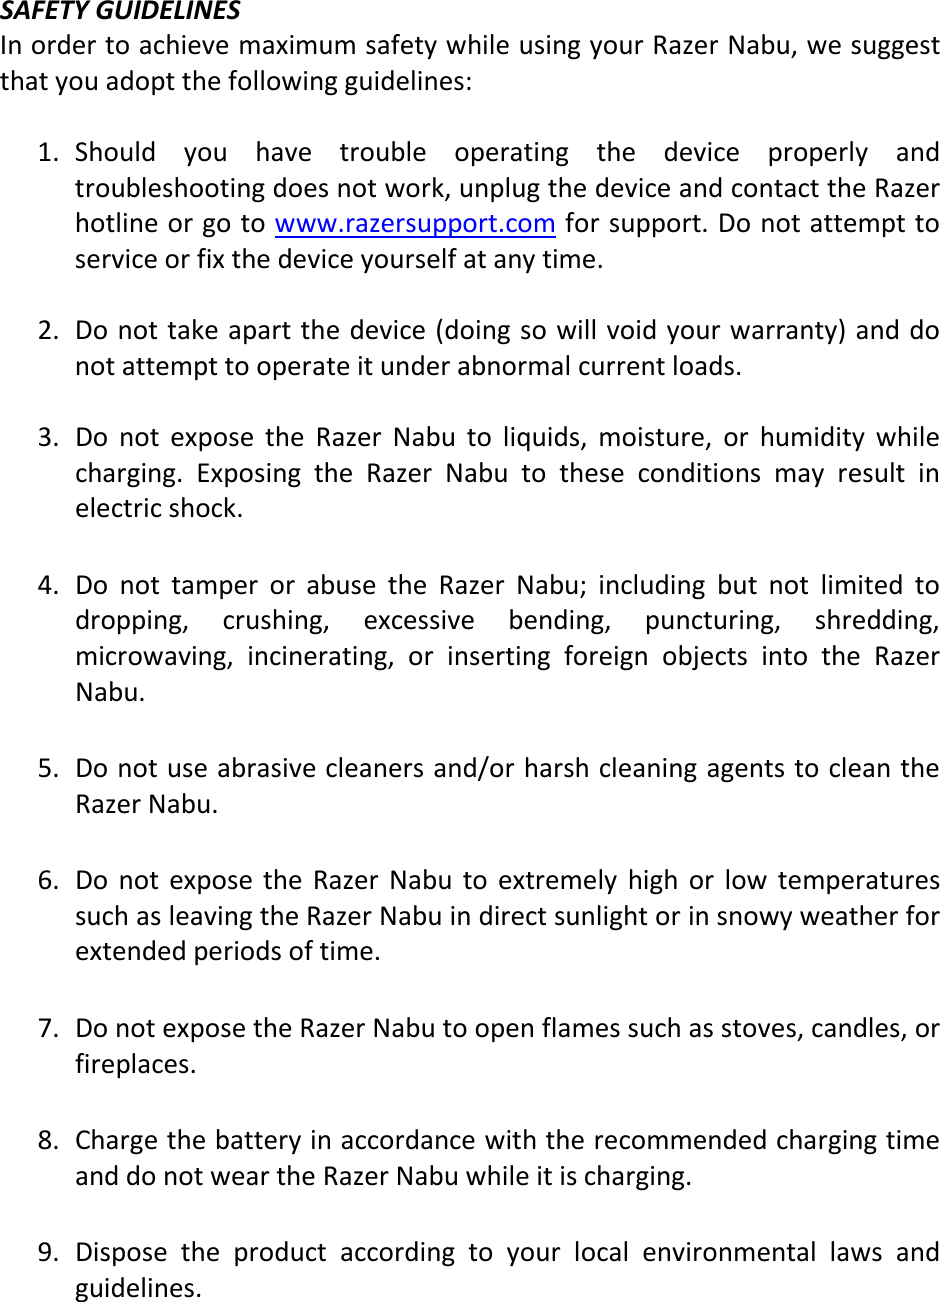  SAFETY GUIDELINES In order to achieve maximum safety while using your Razer Nabu, we suggest that you adopt the following guidelines:  1. Should  you  have  trouble  operating  the  device  properly  and troubleshooting does not work, unplug the device and contact the Razer hotline or go to www.razersupport.com for support. Do not attempt to service or fix the device yourself at any time.  2. Do not take apart the device (doing so will void your warranty) and do not attempt to operate it under abnormal current loads.  3. Do  not  expose  the  Razer  Nabu  to  liquids,  moisture,  or  humidity  while charging.  Exposing  the  Razer  Nabu  to  these  conditions  may  result  in electric shock.    4. Do  not  tamper  or  abuse  the  Razer  Nabu;  including  but  not  limited  to dropping,  crushing,  excessive  bending,  puncturing,  shredding, microwaving,  incinerating,  or  inserting  foreign  objects  into  the  Razer Nabu.  5. Do not use abrasive cleaners and/or harsh cleaning agents to clean the Razer Nabu.  6. Do  not  expose  the  Razer  Nabu  to  extremely  high  or  low  temperatures such as leaving the Razer Nabu in direct sunlight or in snowy weather for extended periods of time.  7. Do not expose the Razer Nabu to open flames such as stoves, candles, or fireplaces.  8. Charge the battery in accordance with the recommended charging time and do not wear the Razer Nabu while it is charging.  9. Dispose  the  product  according  to  your  local  environmental  laws  and guidelines.    